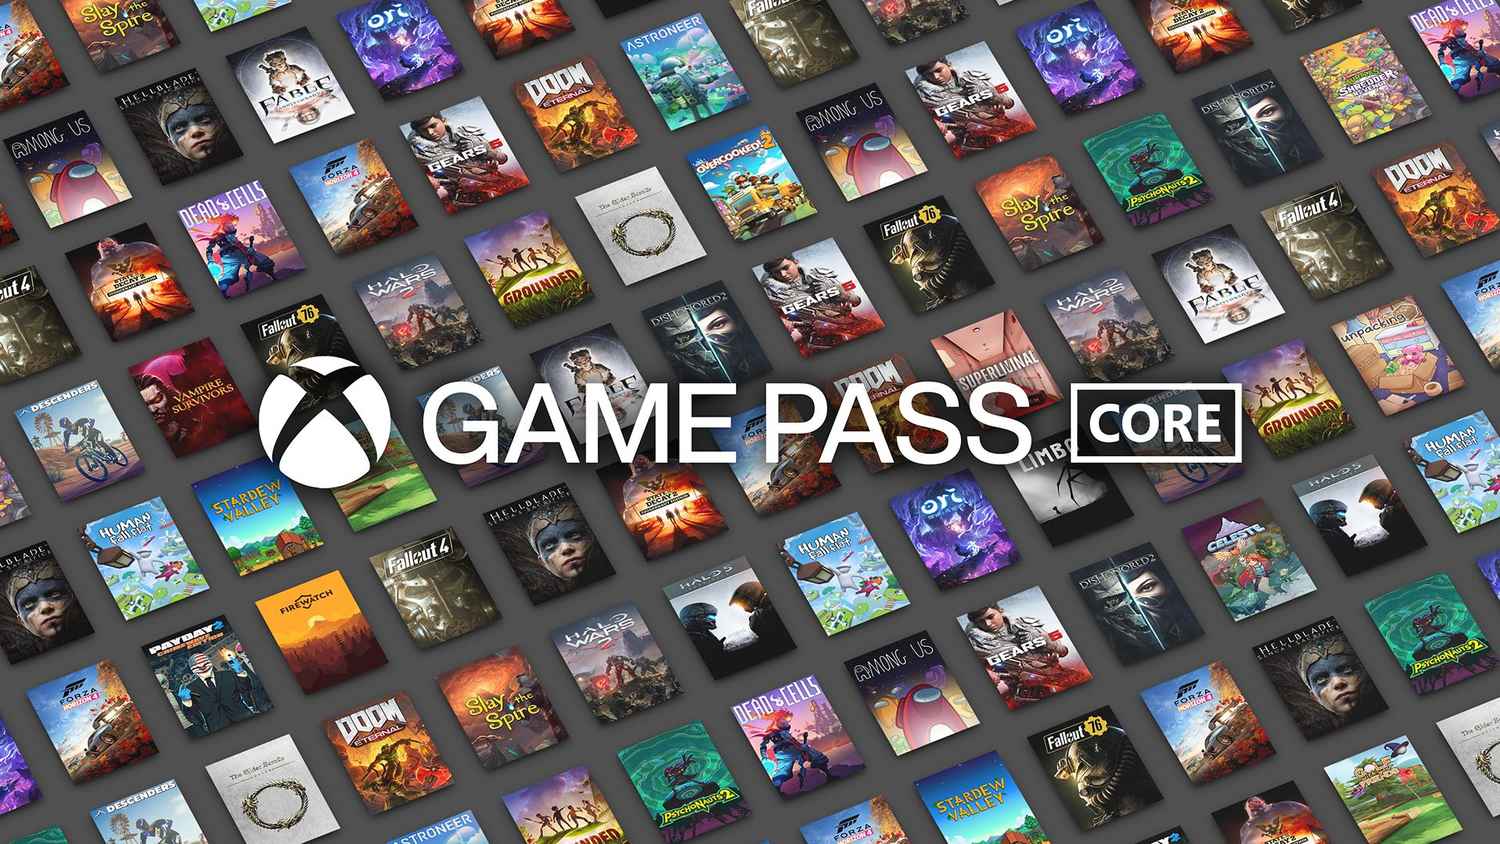 Xbox Game Pass Core to feature 36 games at launch | Digit